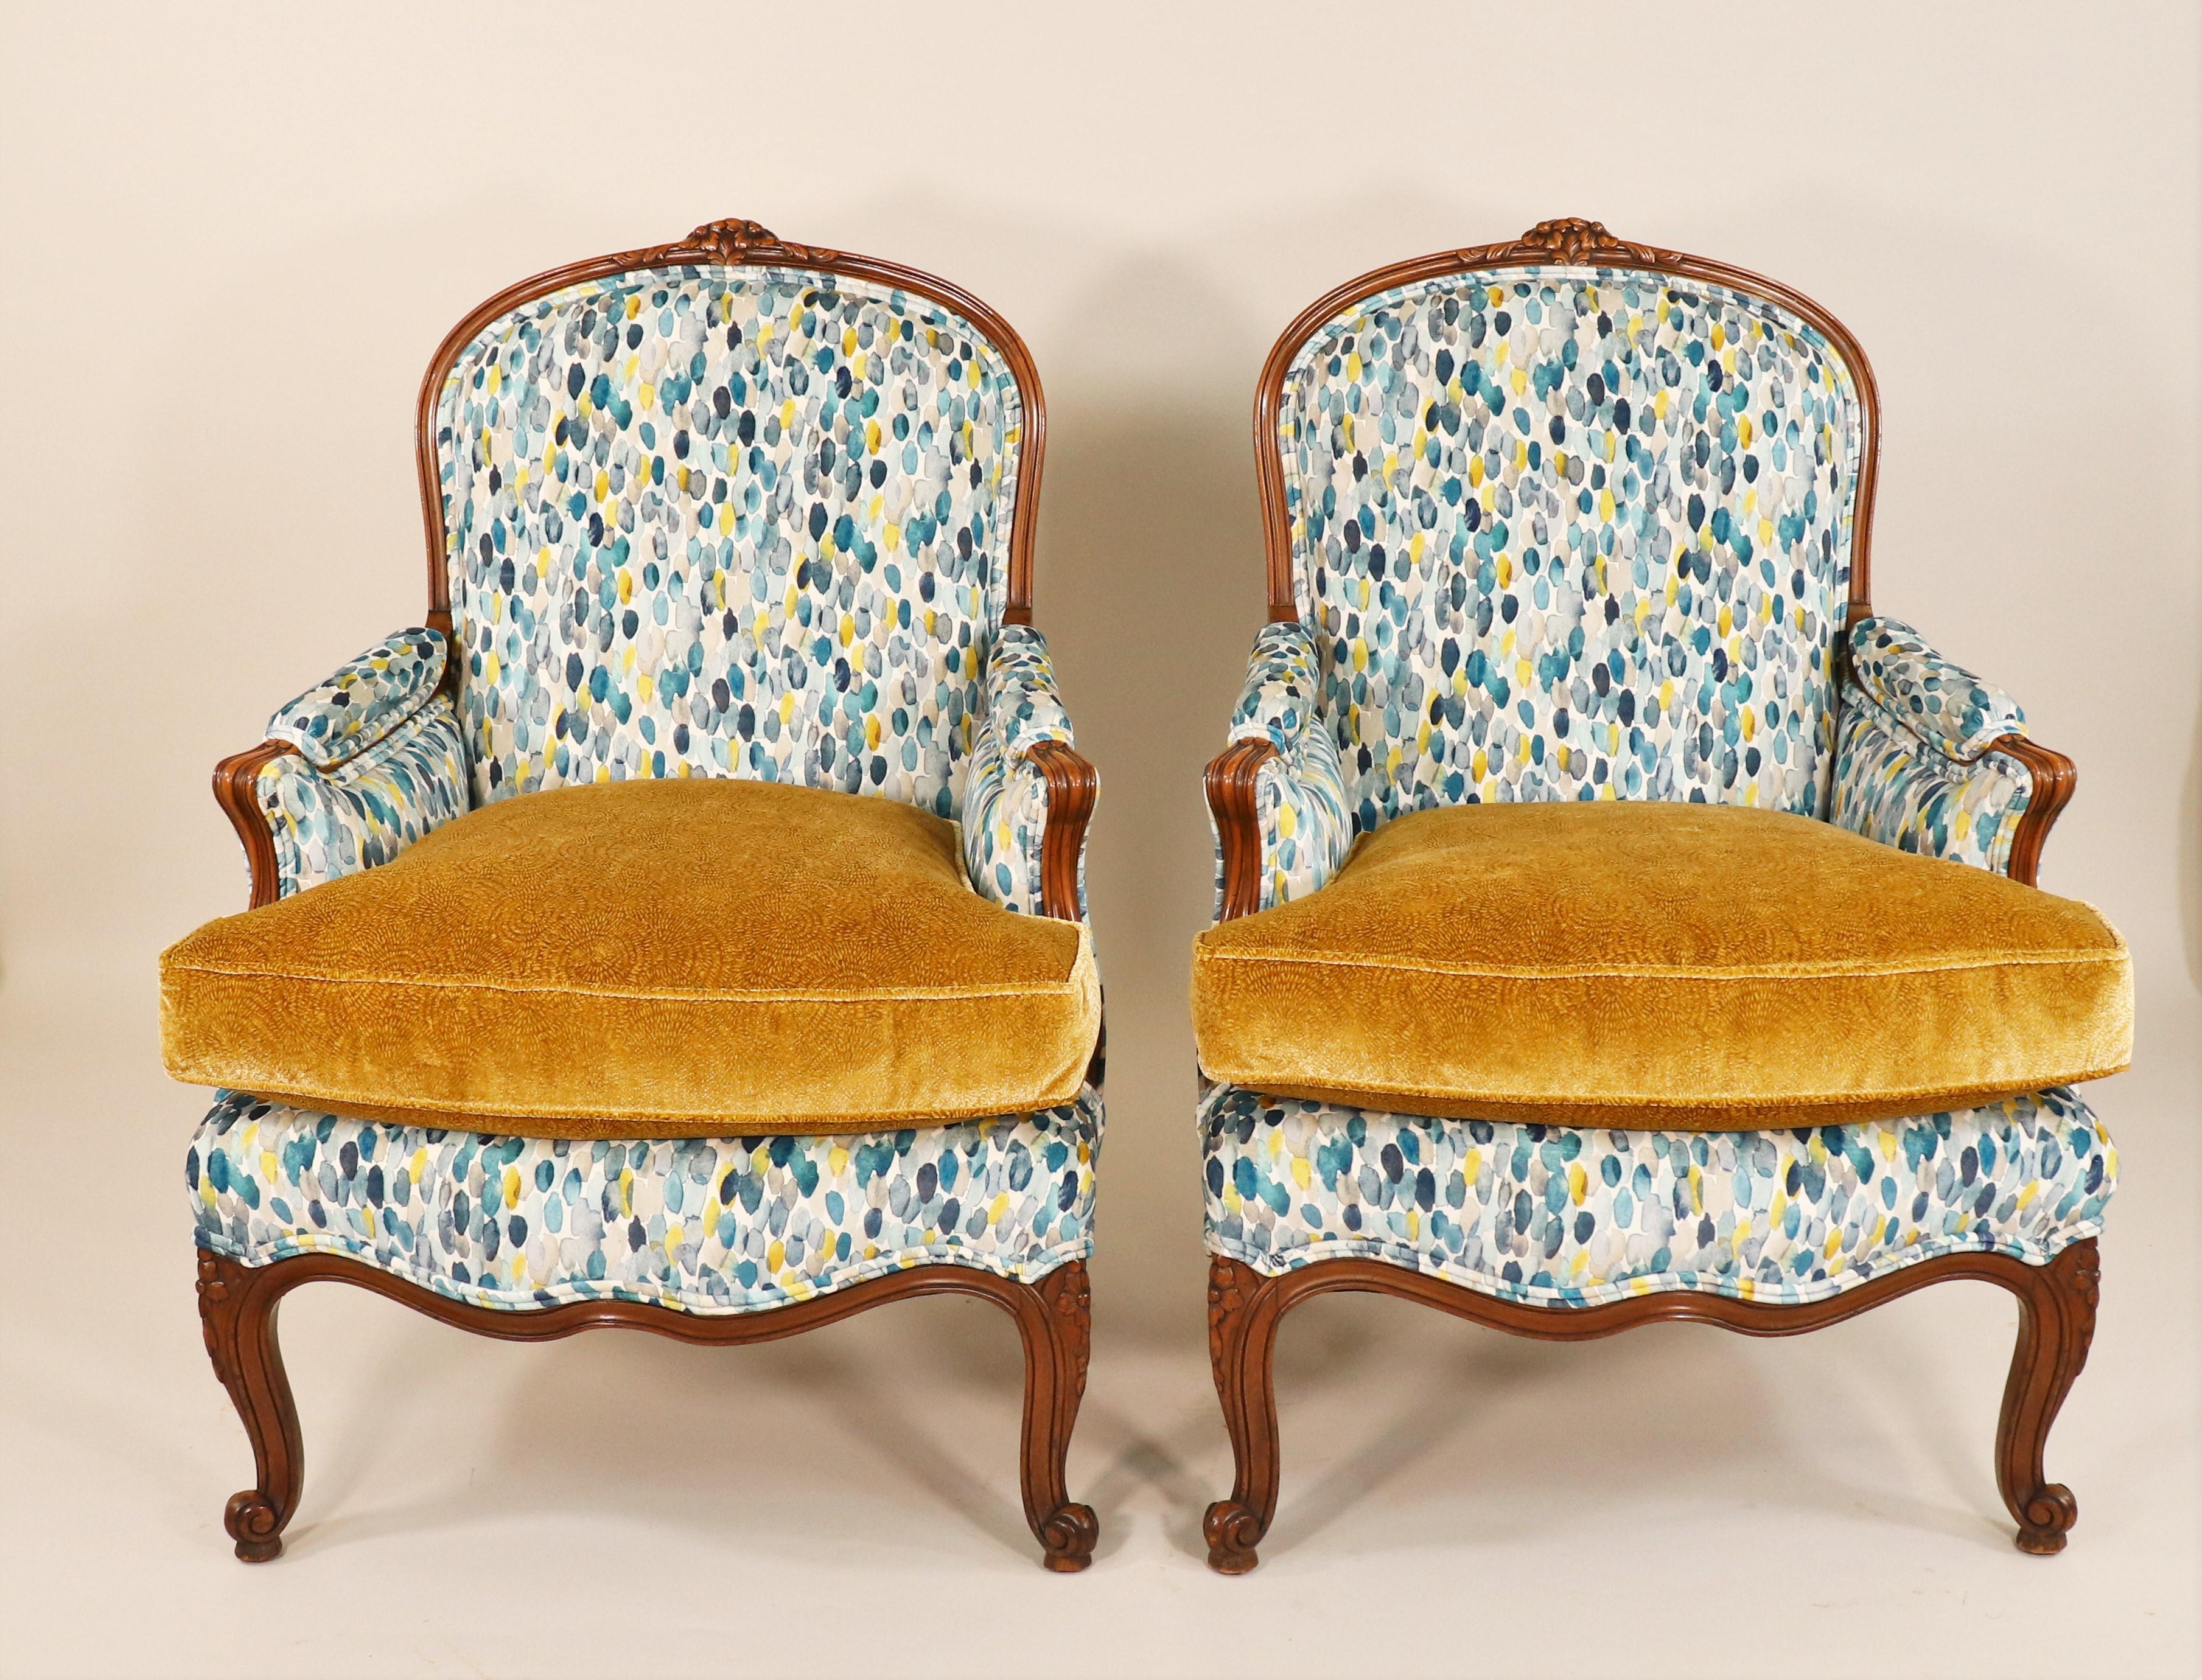 This is an exquisite pair of French mid-19th century Louis XV Style Bergère armchairs. The style was a direct response to the previous Louis XIV style, which valued furniture that emanated power and masculinity. Louis XV-style furniture was daintier